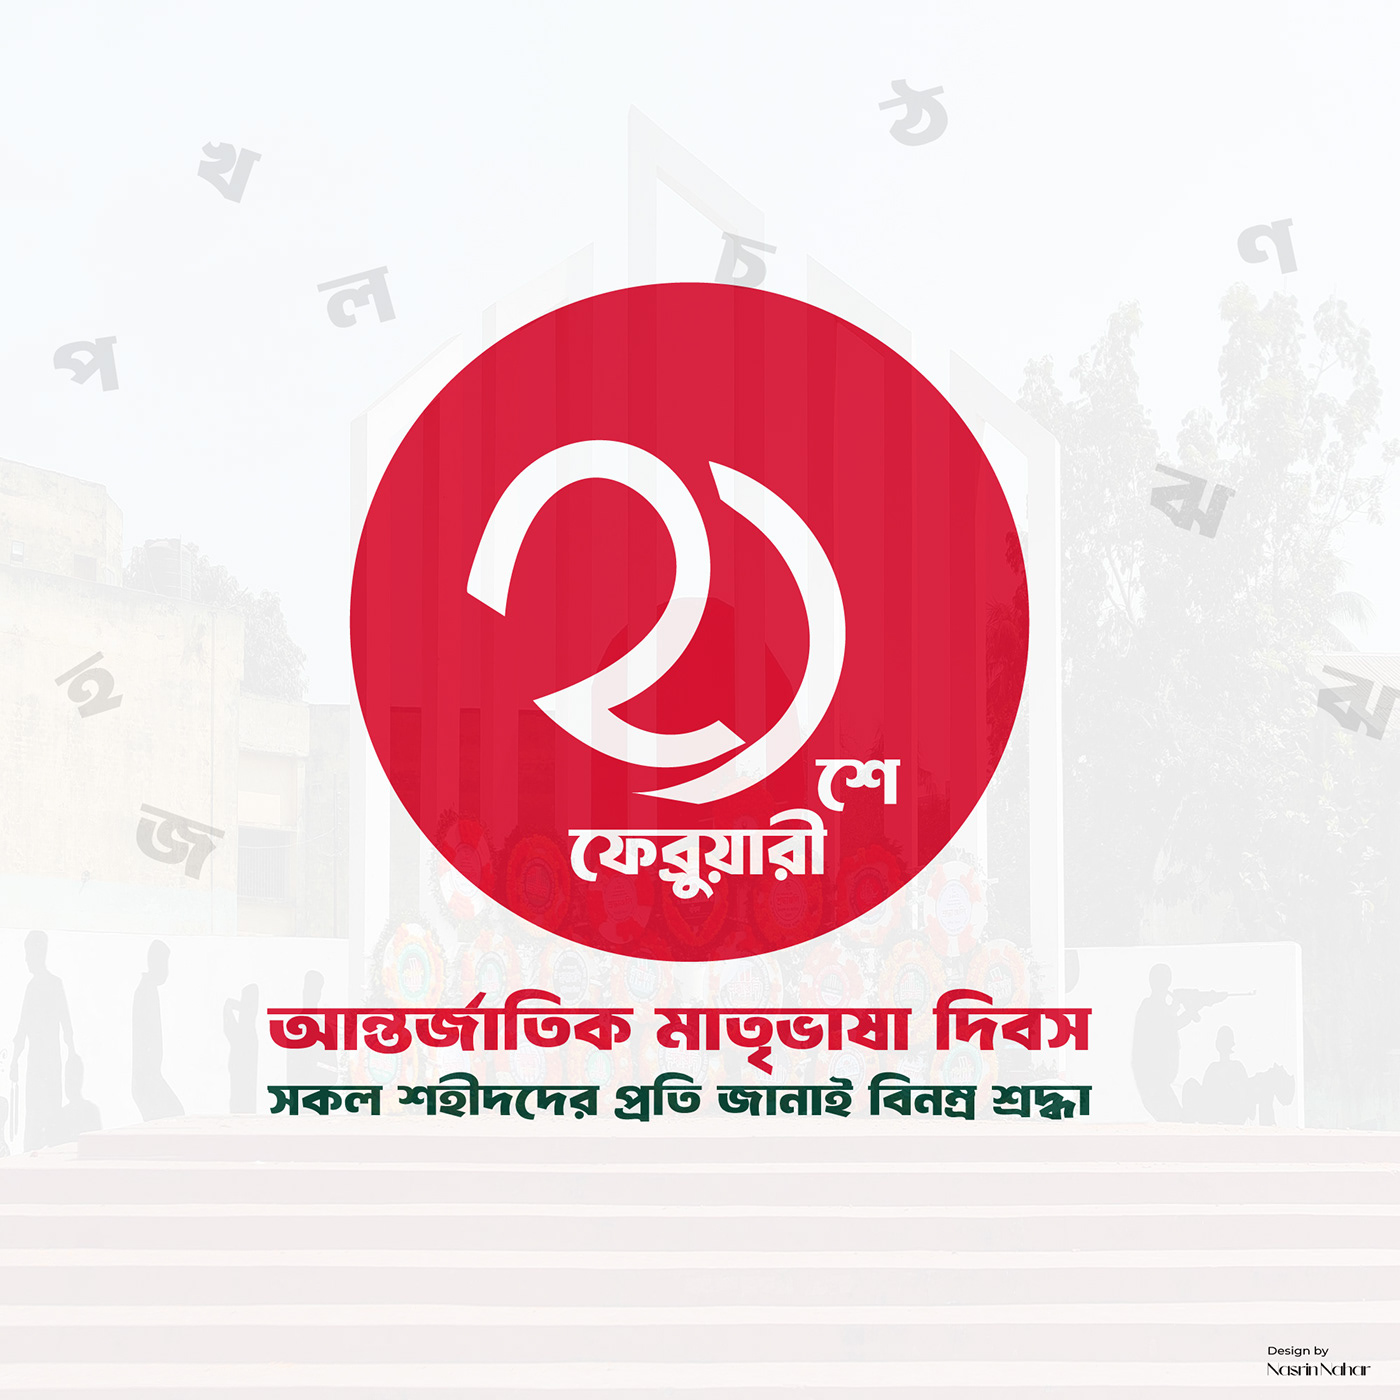 21 february banner Mother Language day 21 february language day ekushey february Shaheed minar